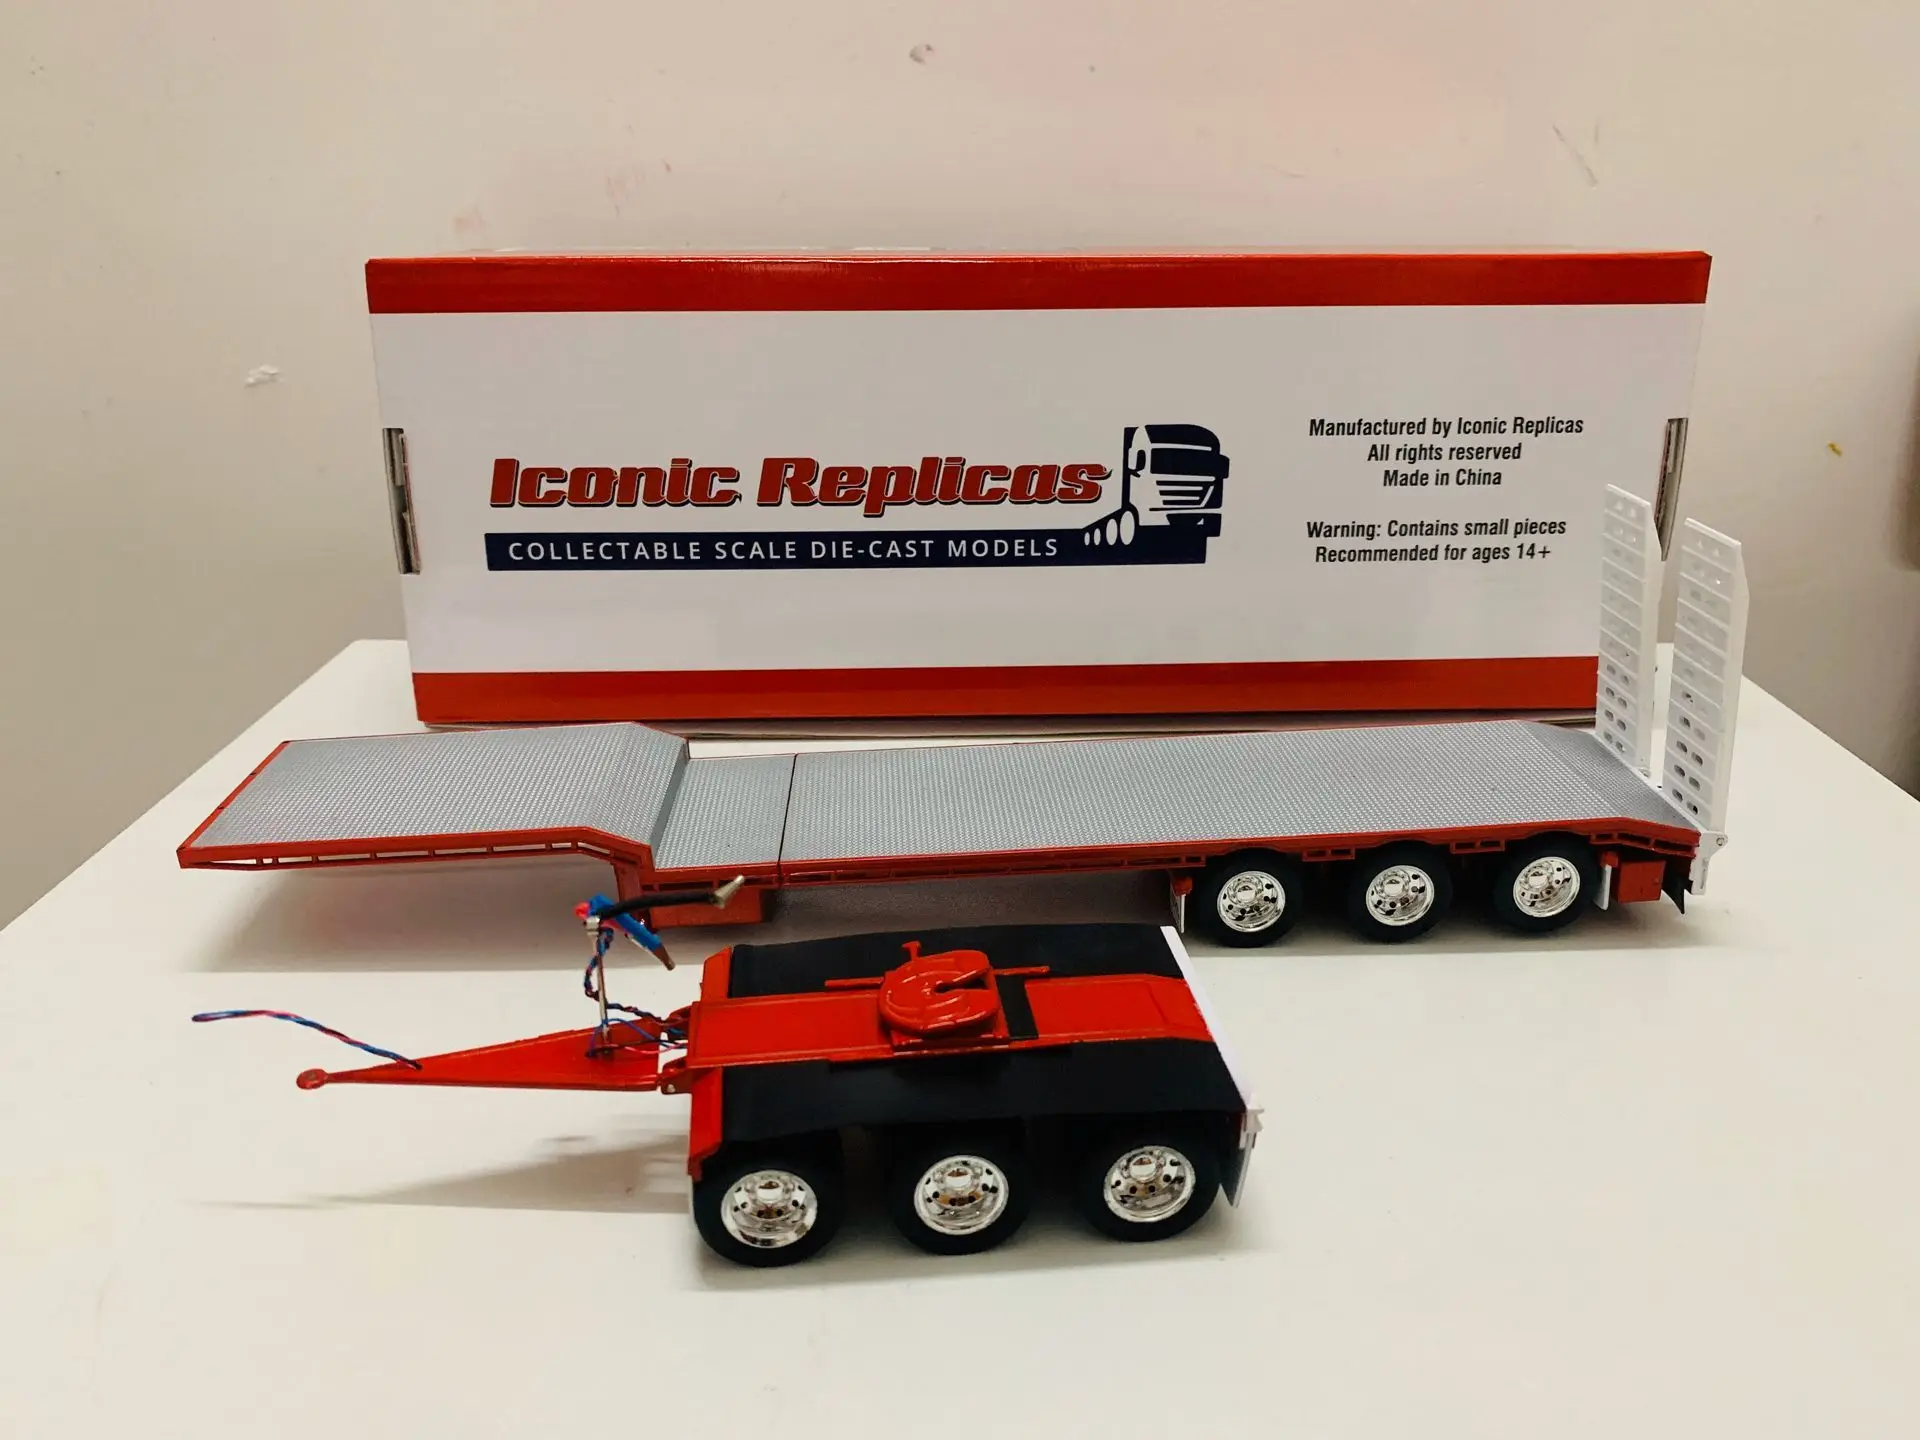 

1:50 Scale Die-Cast Collectable Truck Model Iconic Replicas CTE 45' Extendable Drop Deck Trailer 3 Axle Red New in Box